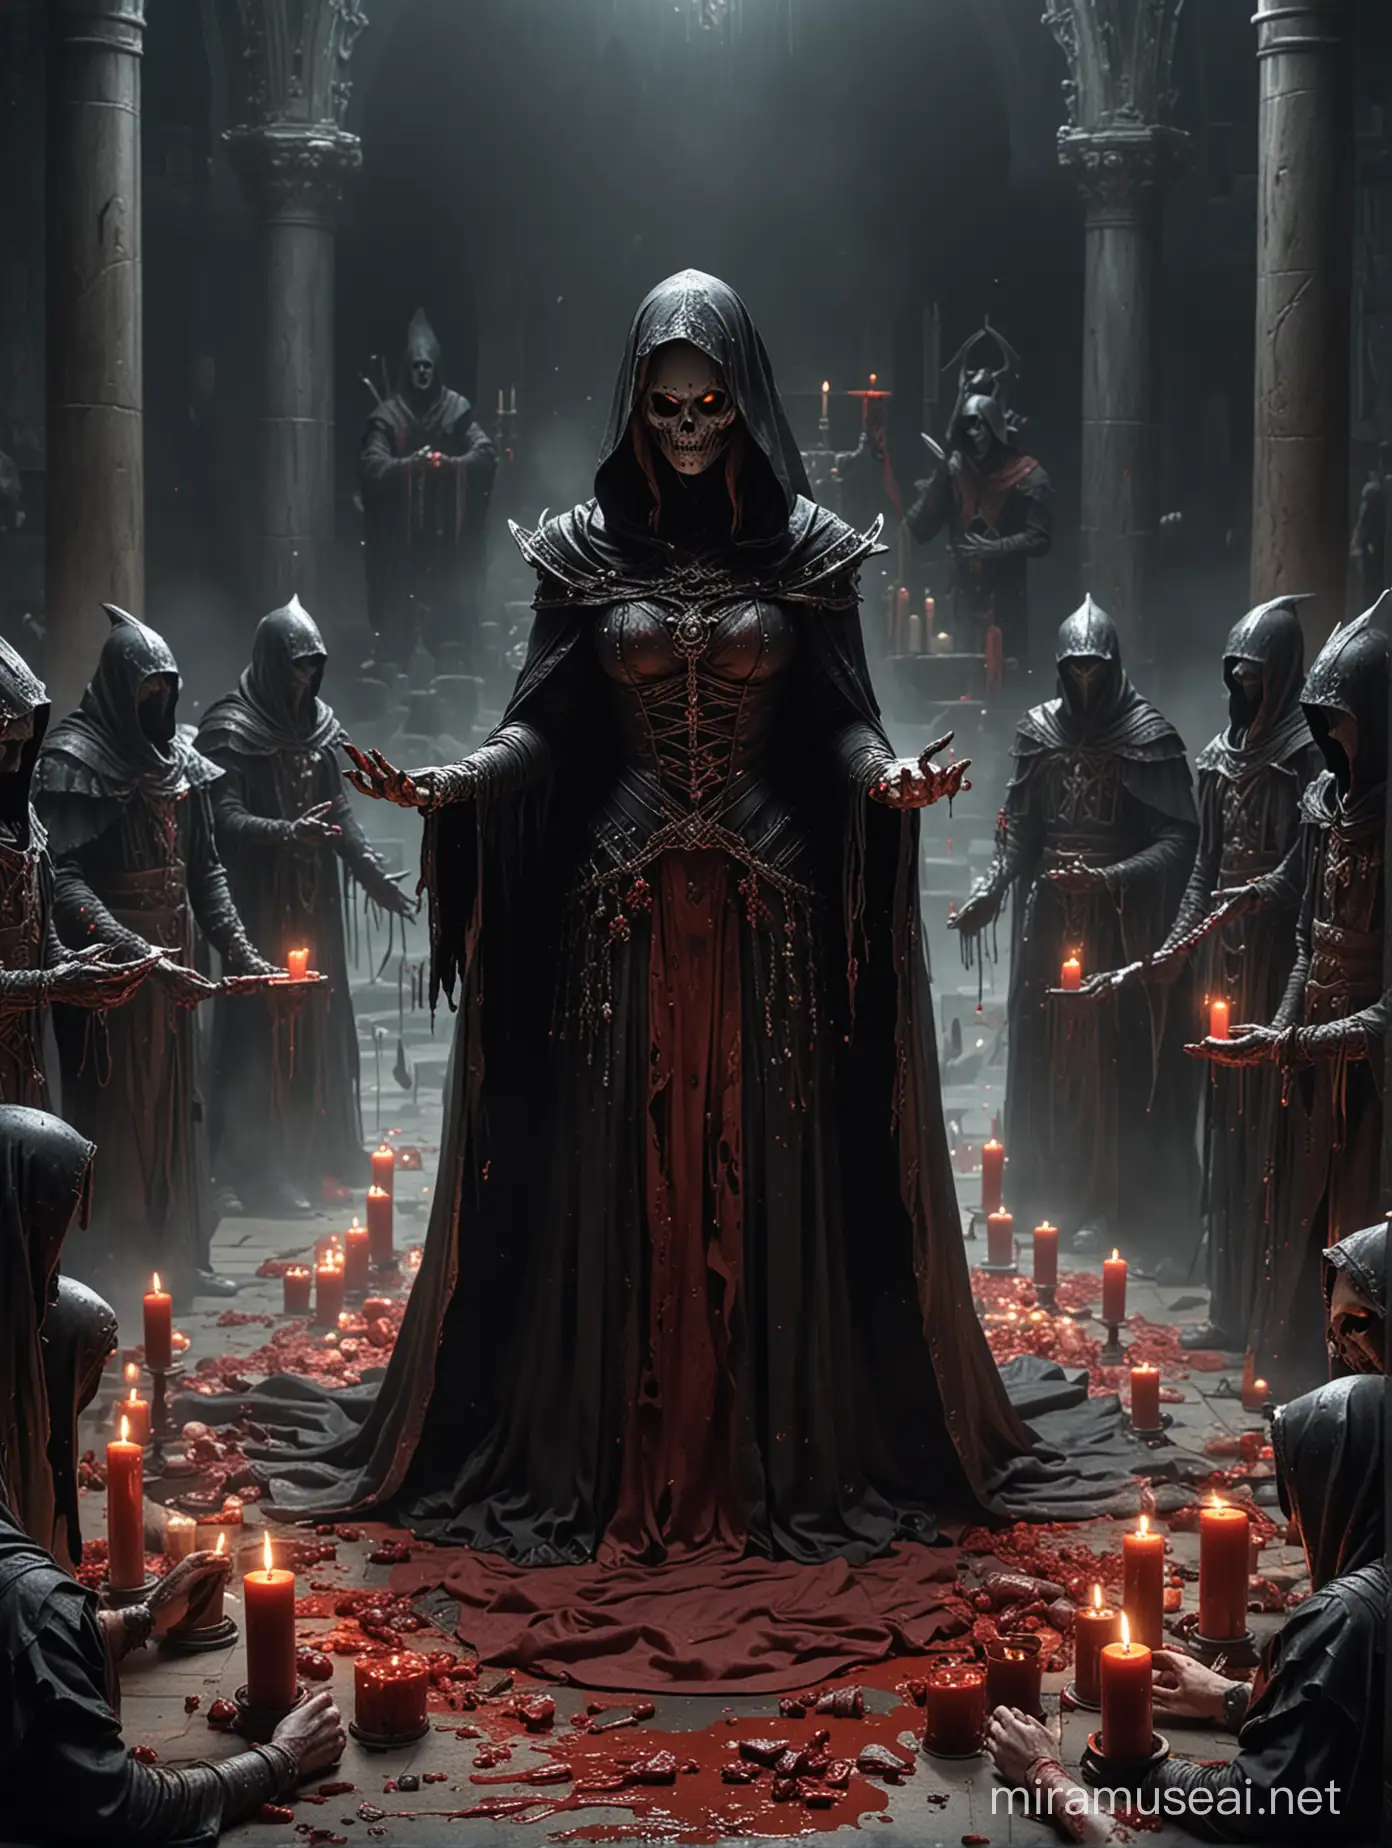 The main character is a queen lich performing a dark ritual on a bloody altar. Around her are hooded acolytes bowing.